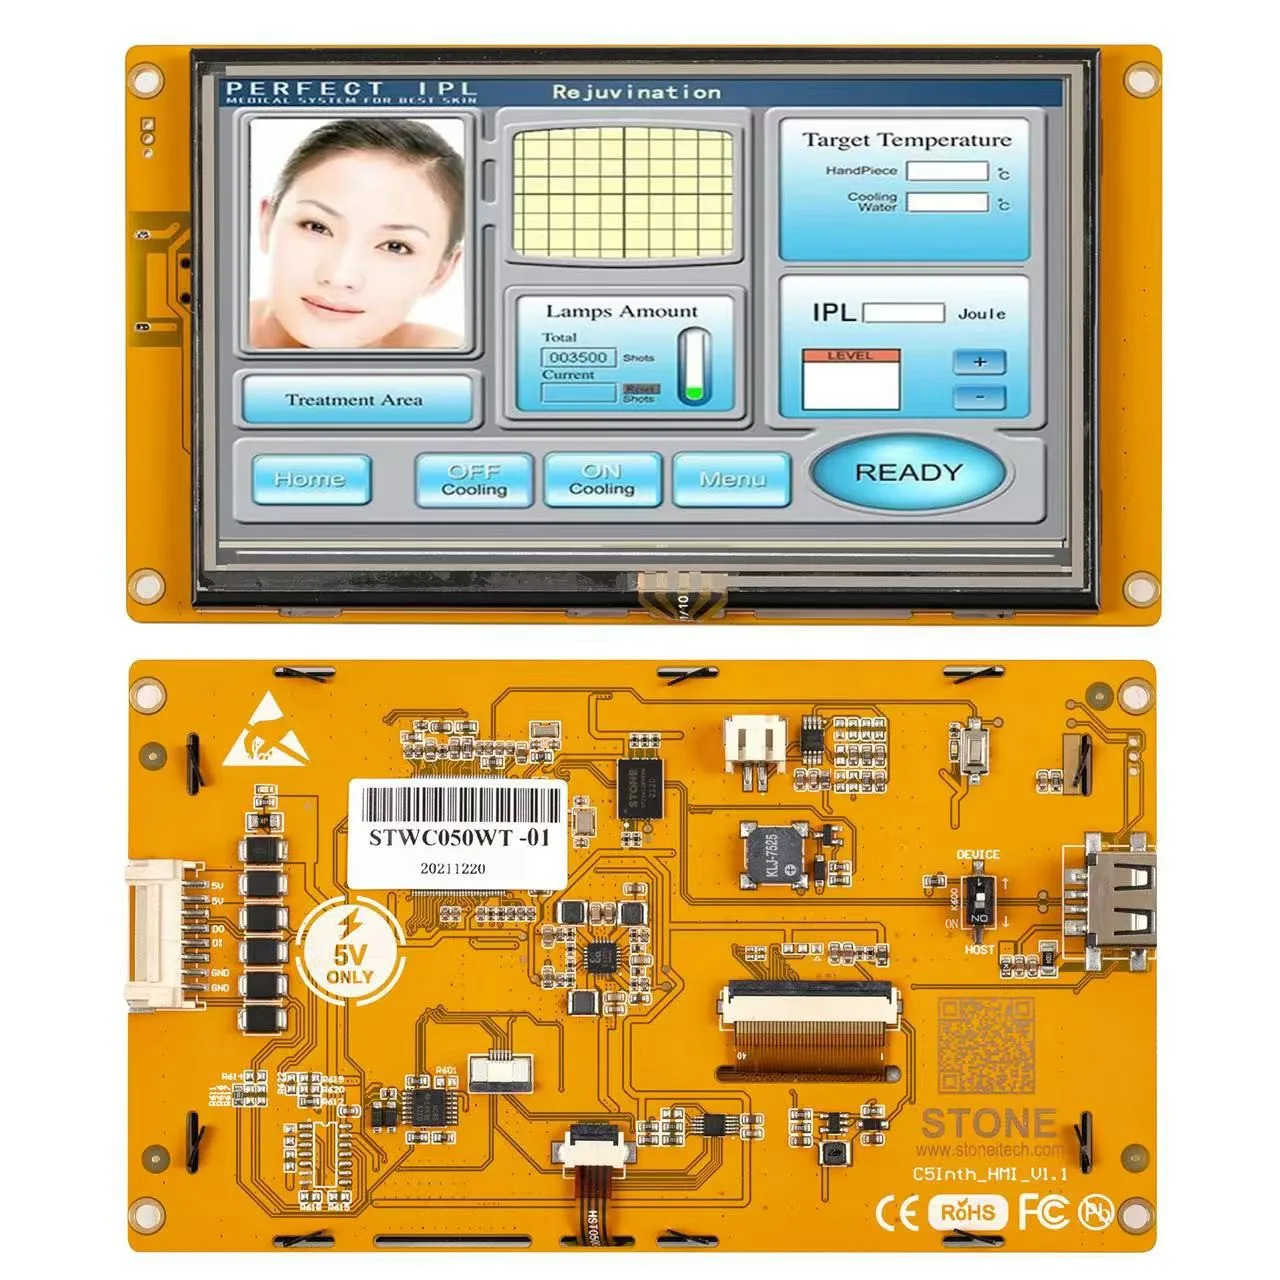 7 Inch 800x480 HMI TFT LCD RGB 262K Touch Panel with Controller Board + Driver + GUI Software + UART Port